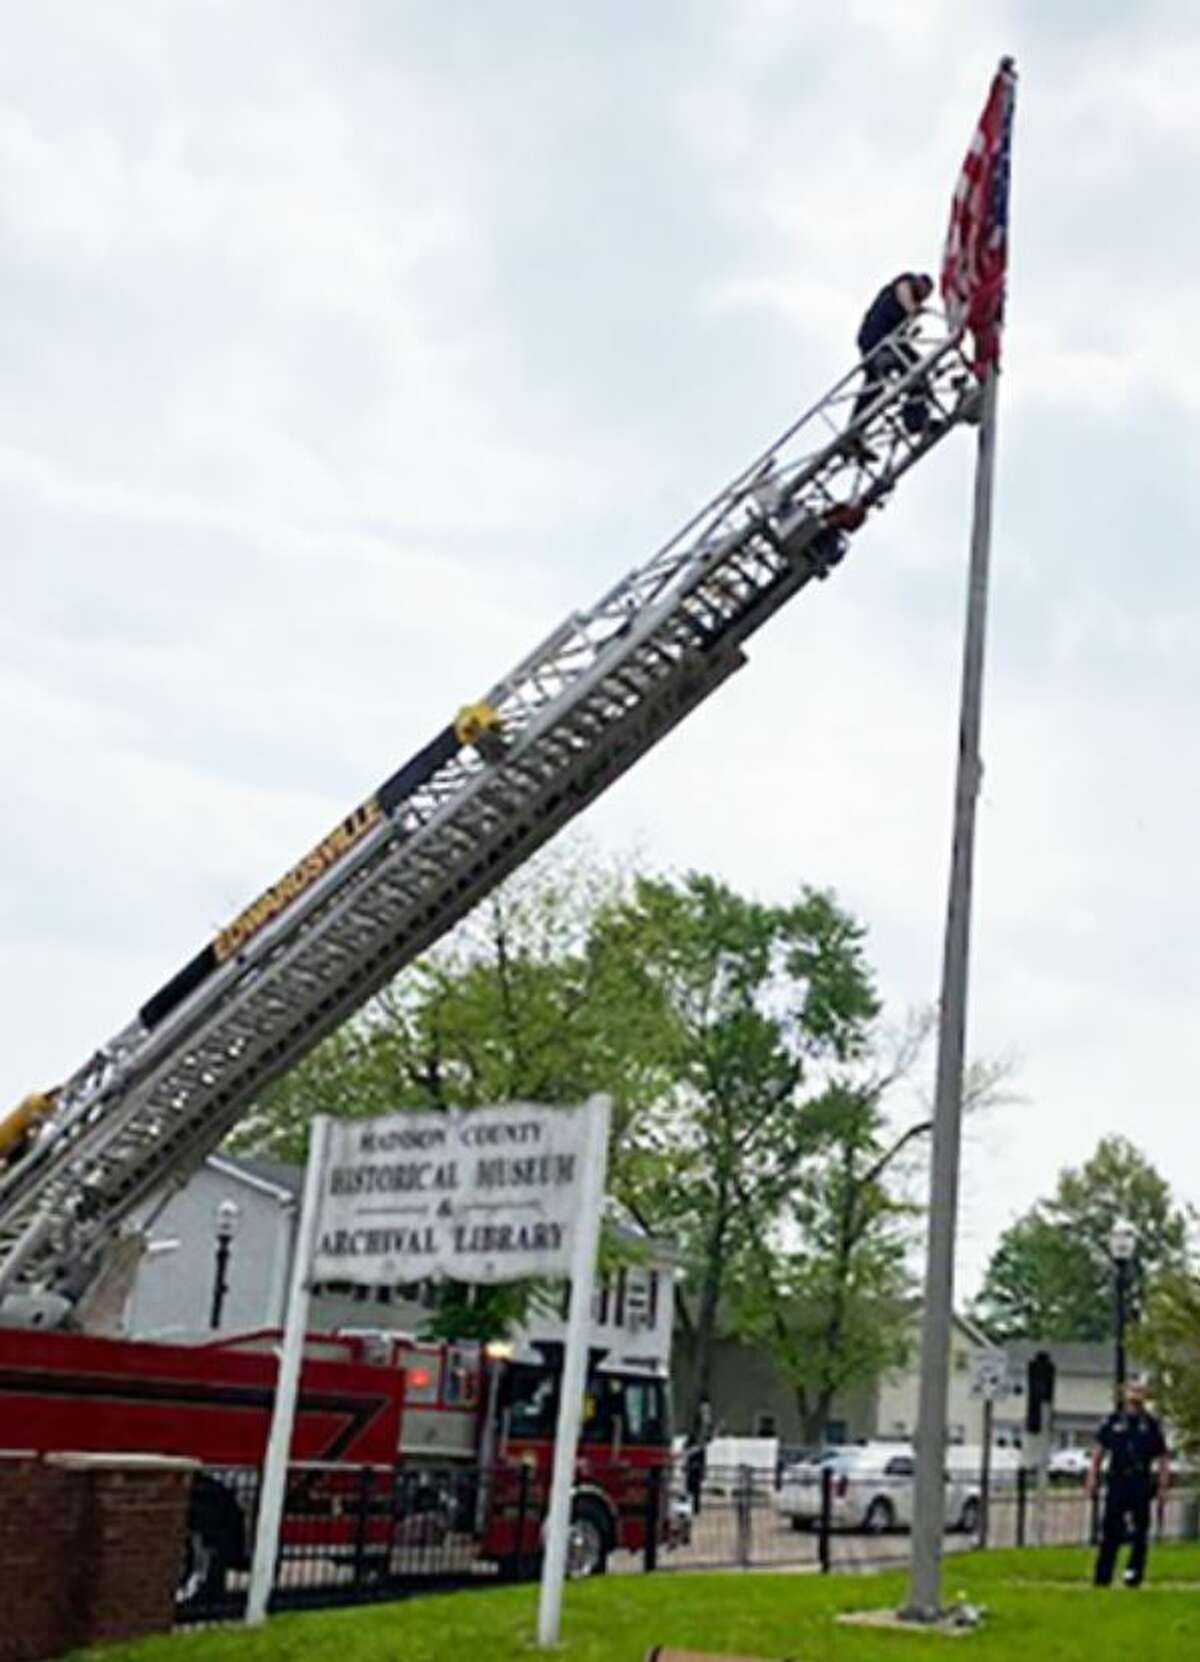 The Edwardsville Fire Department uses a ladder truck to remove a tattered American flag that had been caught on a chain on a flagpole at the Madison County Historical Society Museum and Archival Library in Edwardsville.